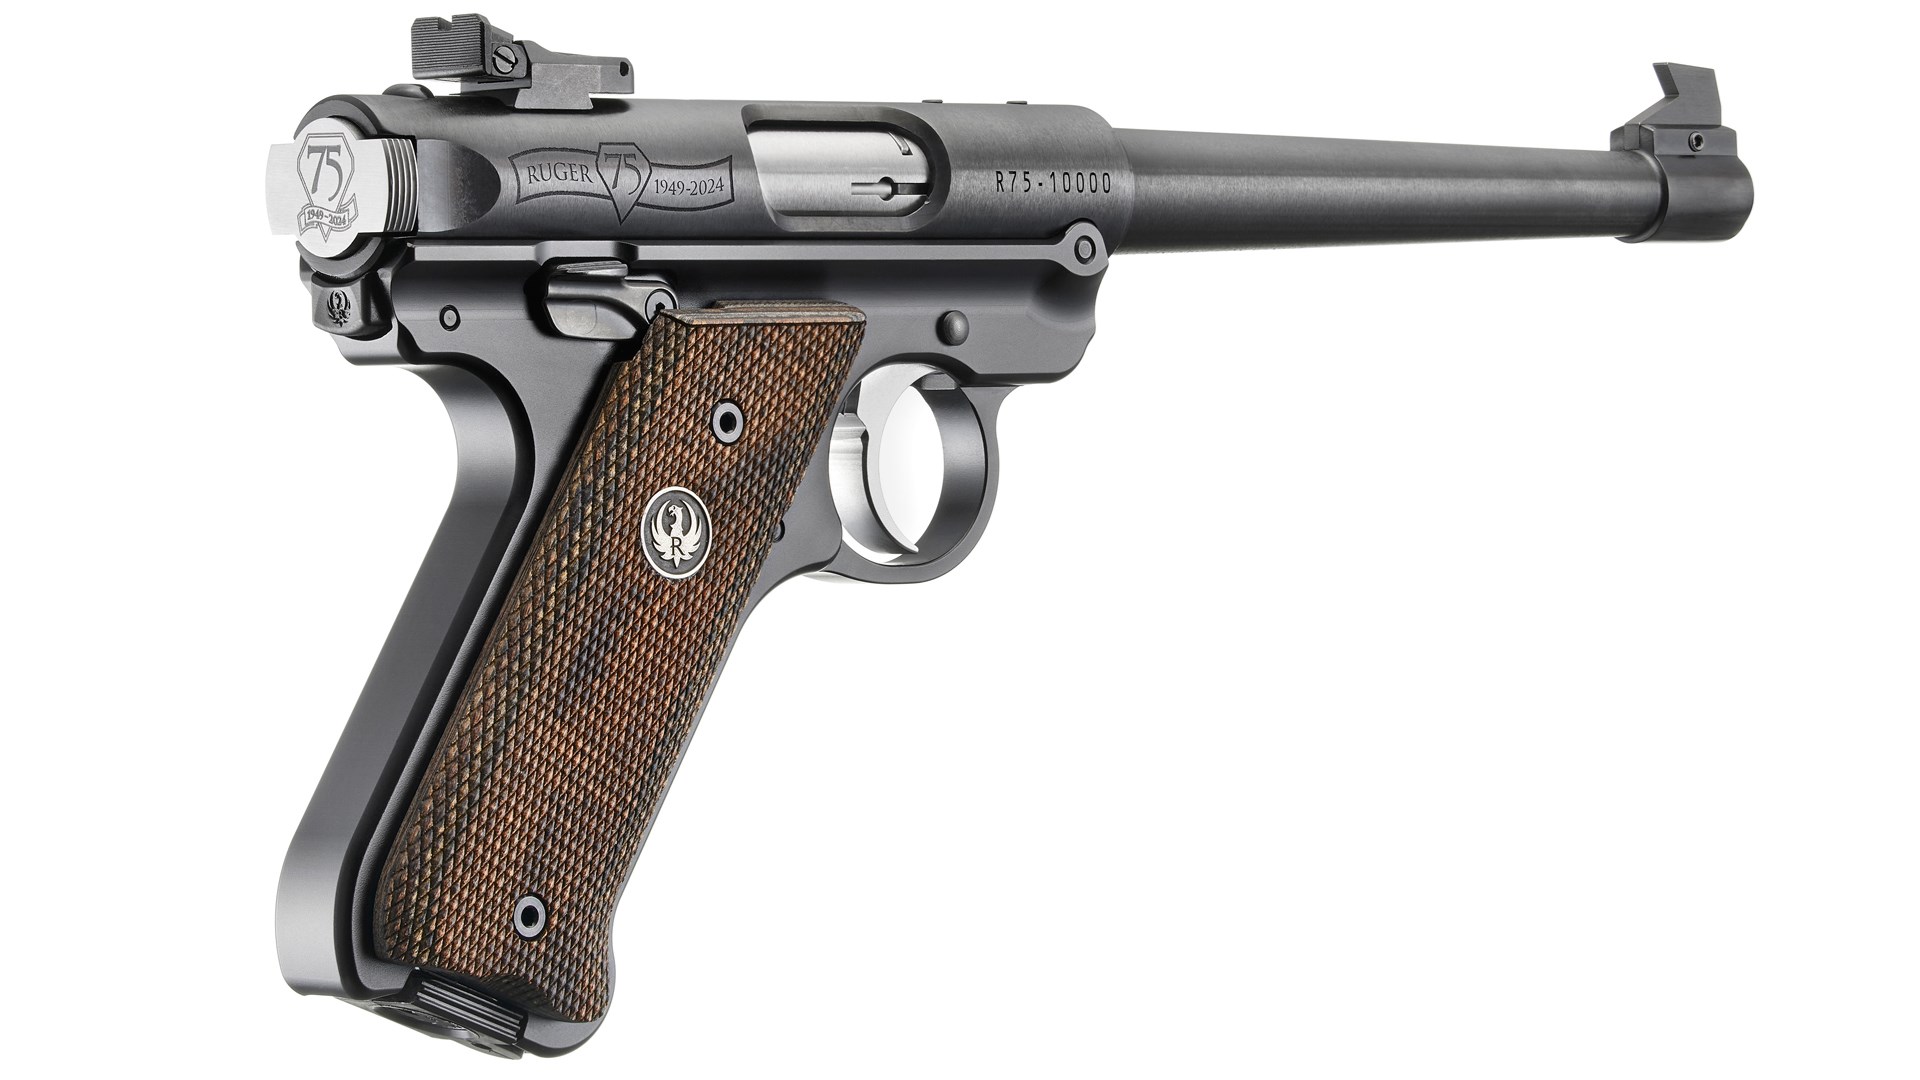 Angled right-side shot of the Ruger 75th Anniversary Mark IV pistol.